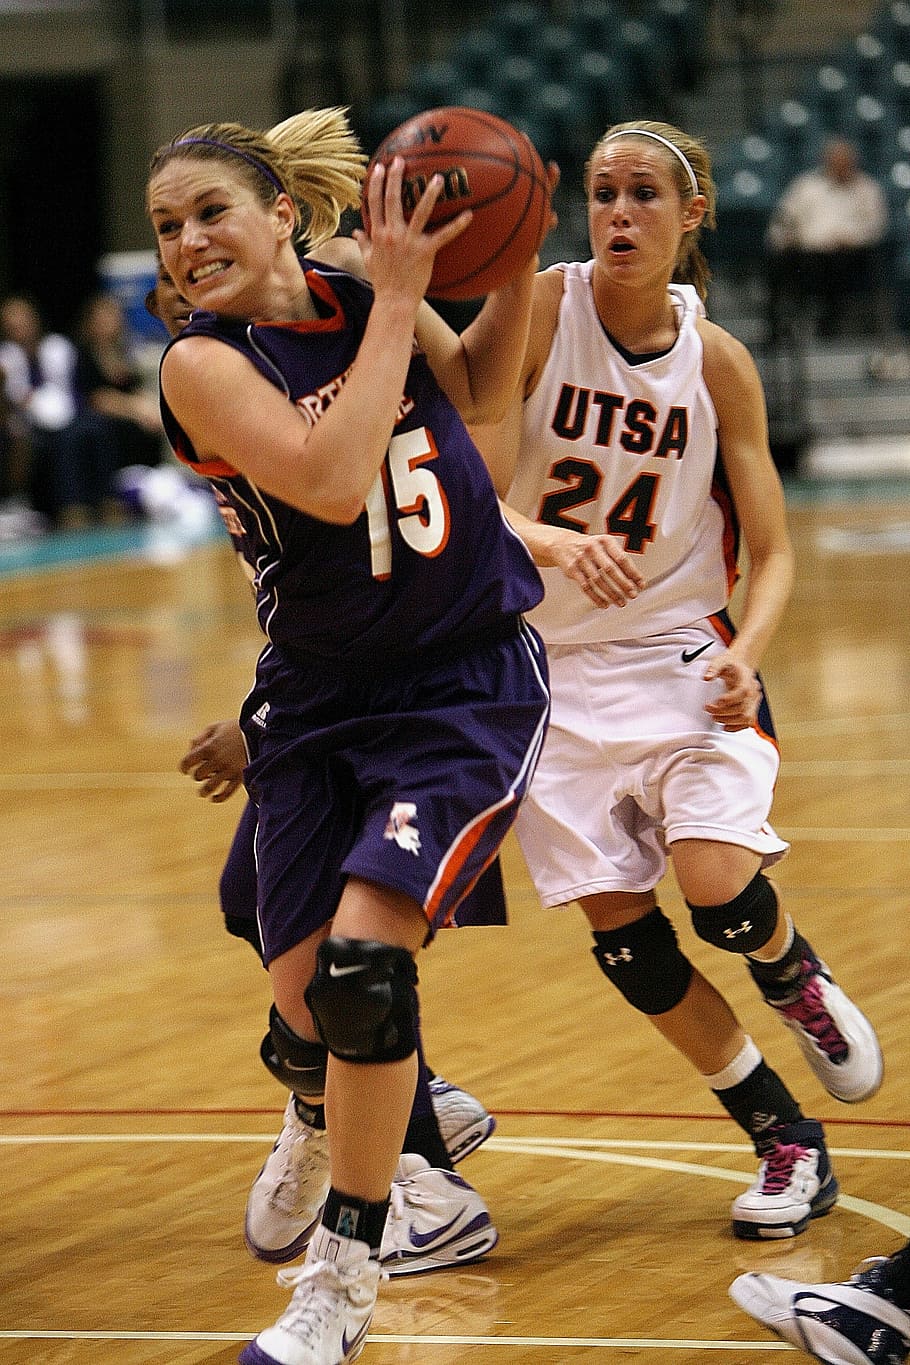 three women playing basketball, female, action, game, college